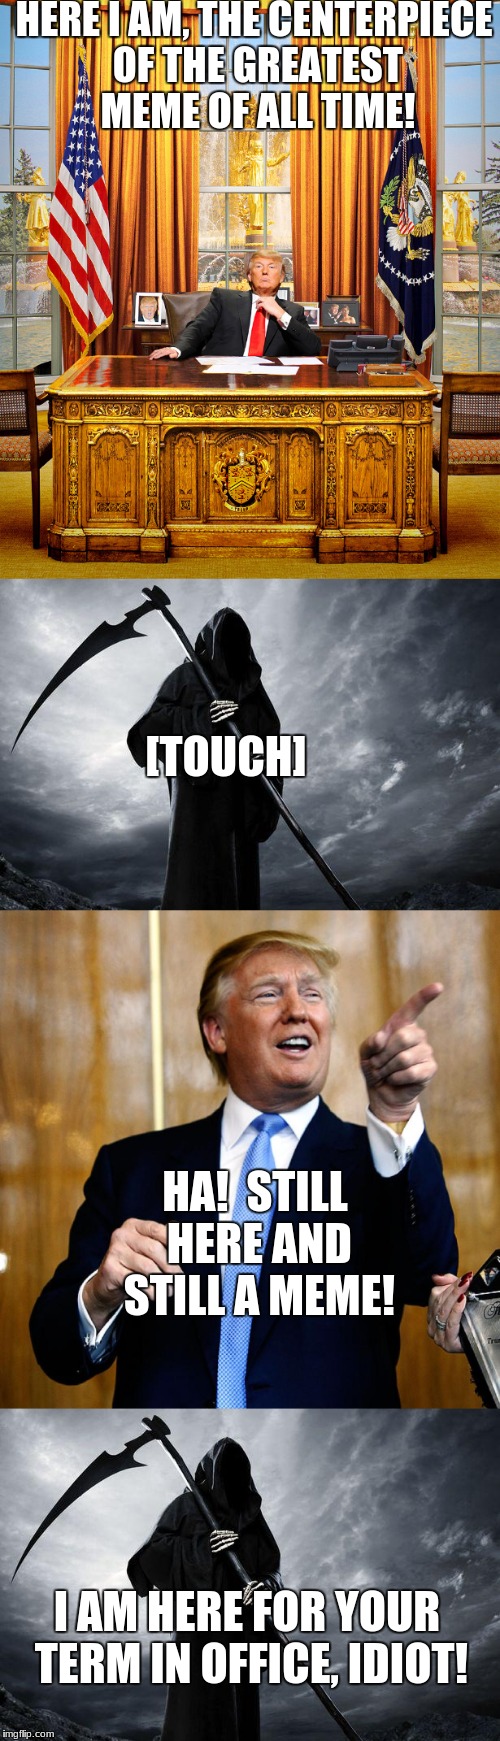 His Days Are Numbered (Dead Memes Week)... | HERE I AM, THE CENTERPIECE OF THE GREATEST MEME OF ALL TIME! [TOUCH]; HA!  STILL HERE AND STILL A MEME! I AM HERE FOR YOUR TERM IN OFFICE, IDIOT! | image tagged in dead meme,donald trump is an idiot,grim reaper,funny,memes | made w/ Imgflip meme maker